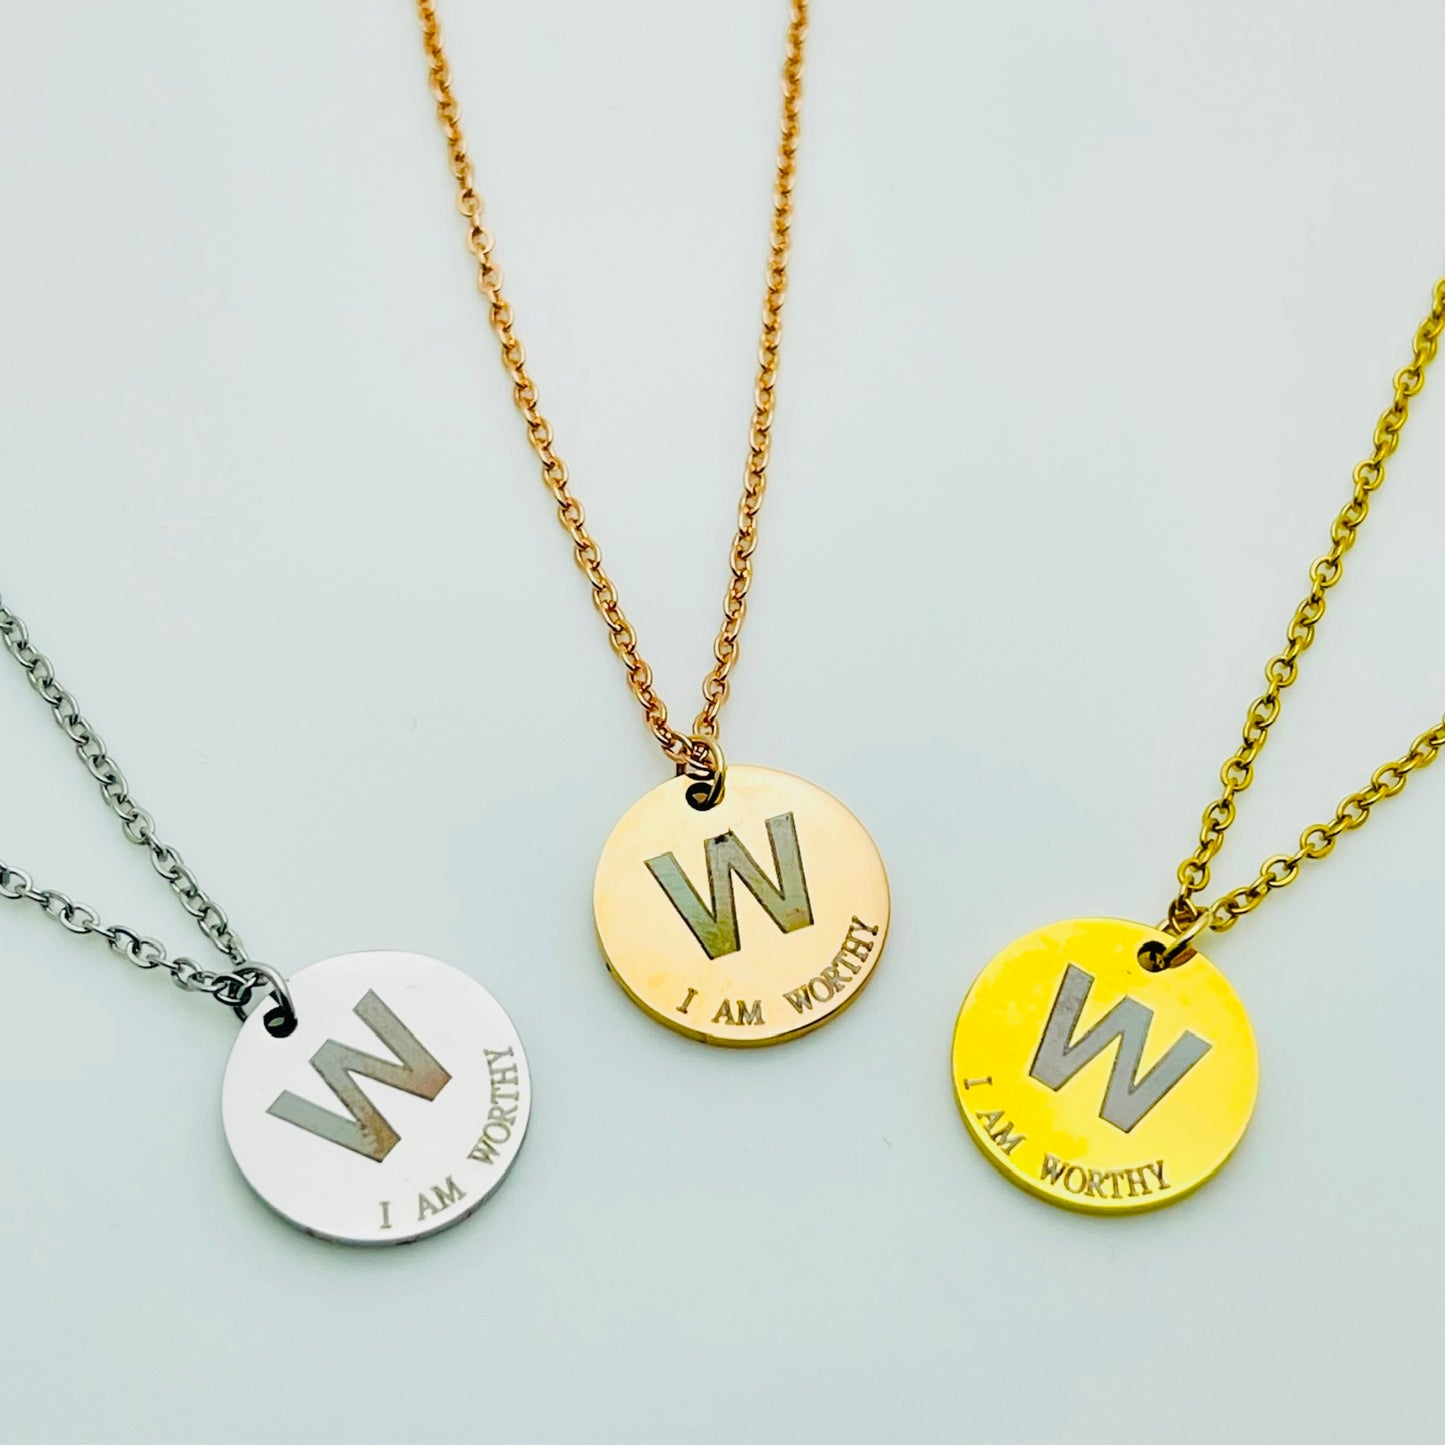 Worthy Positive Affirmation Necklace